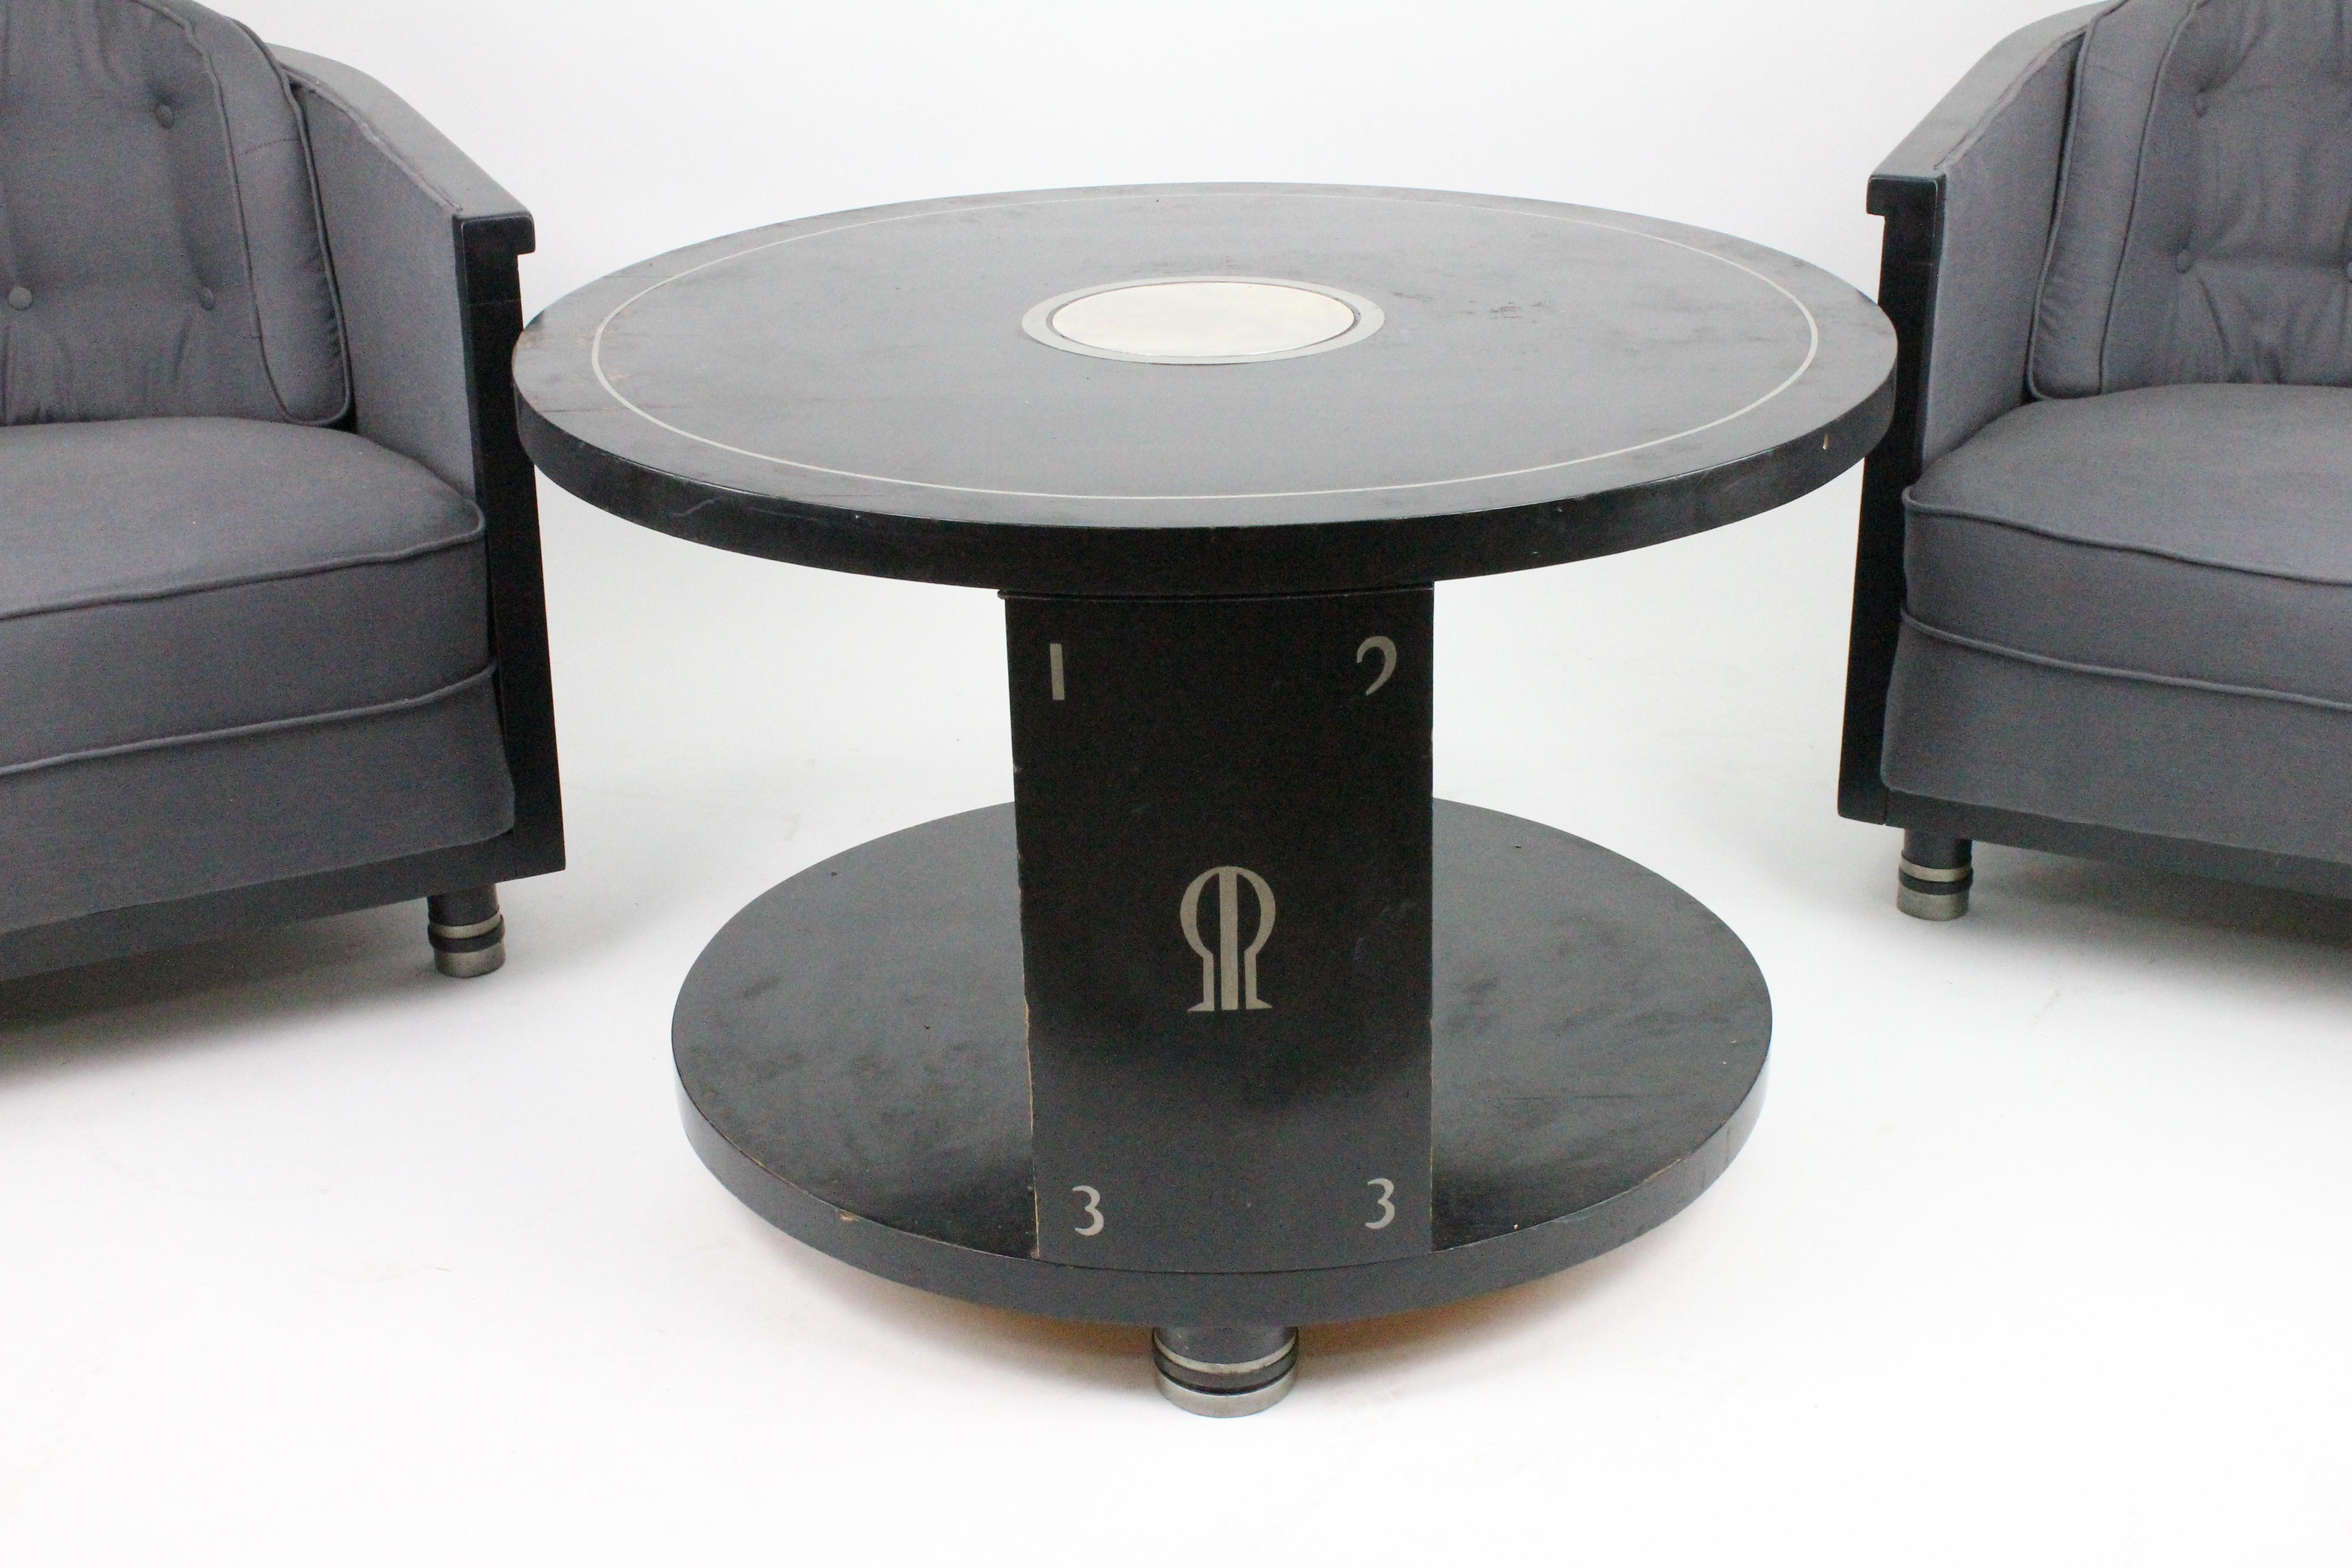 Alvar Andersson Table, 1933, Swedish, Black Painted with Pewter Inlays (Schwedisch)